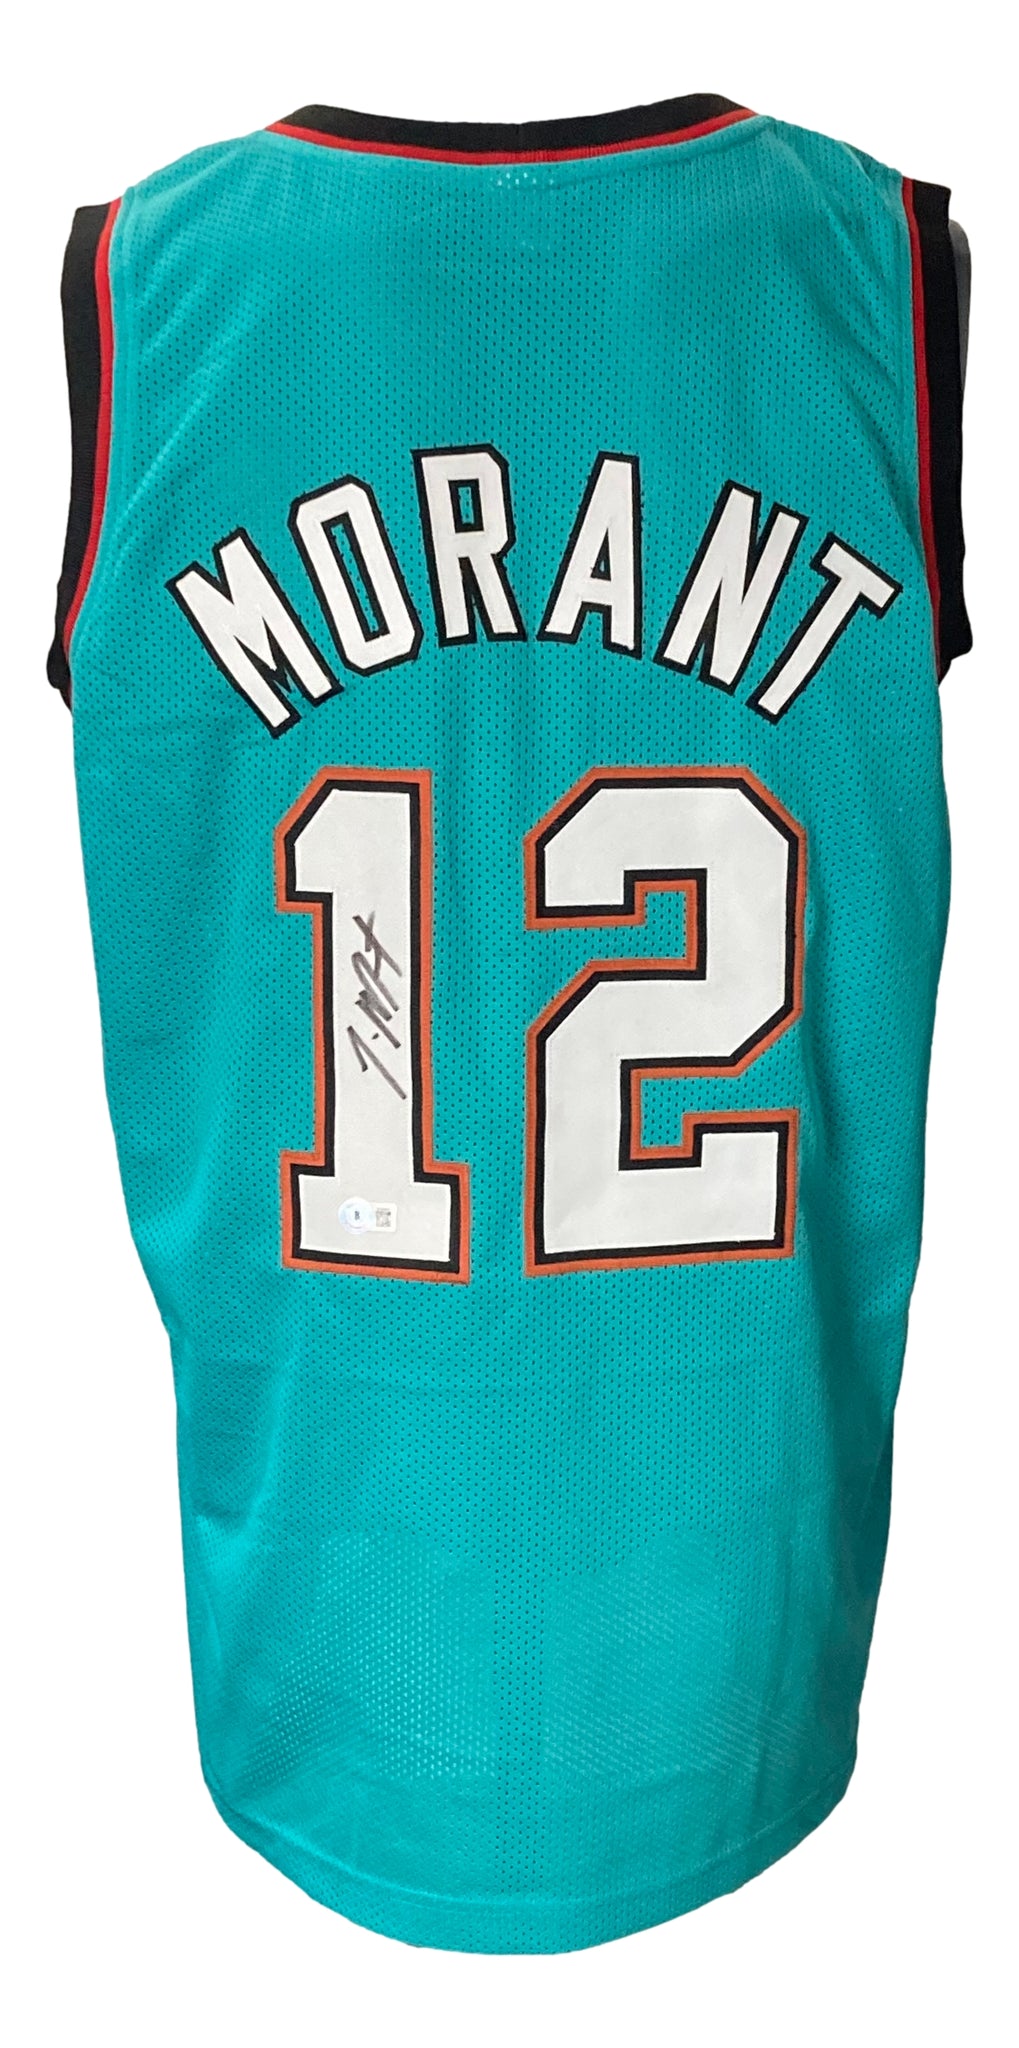 morant jersey teal